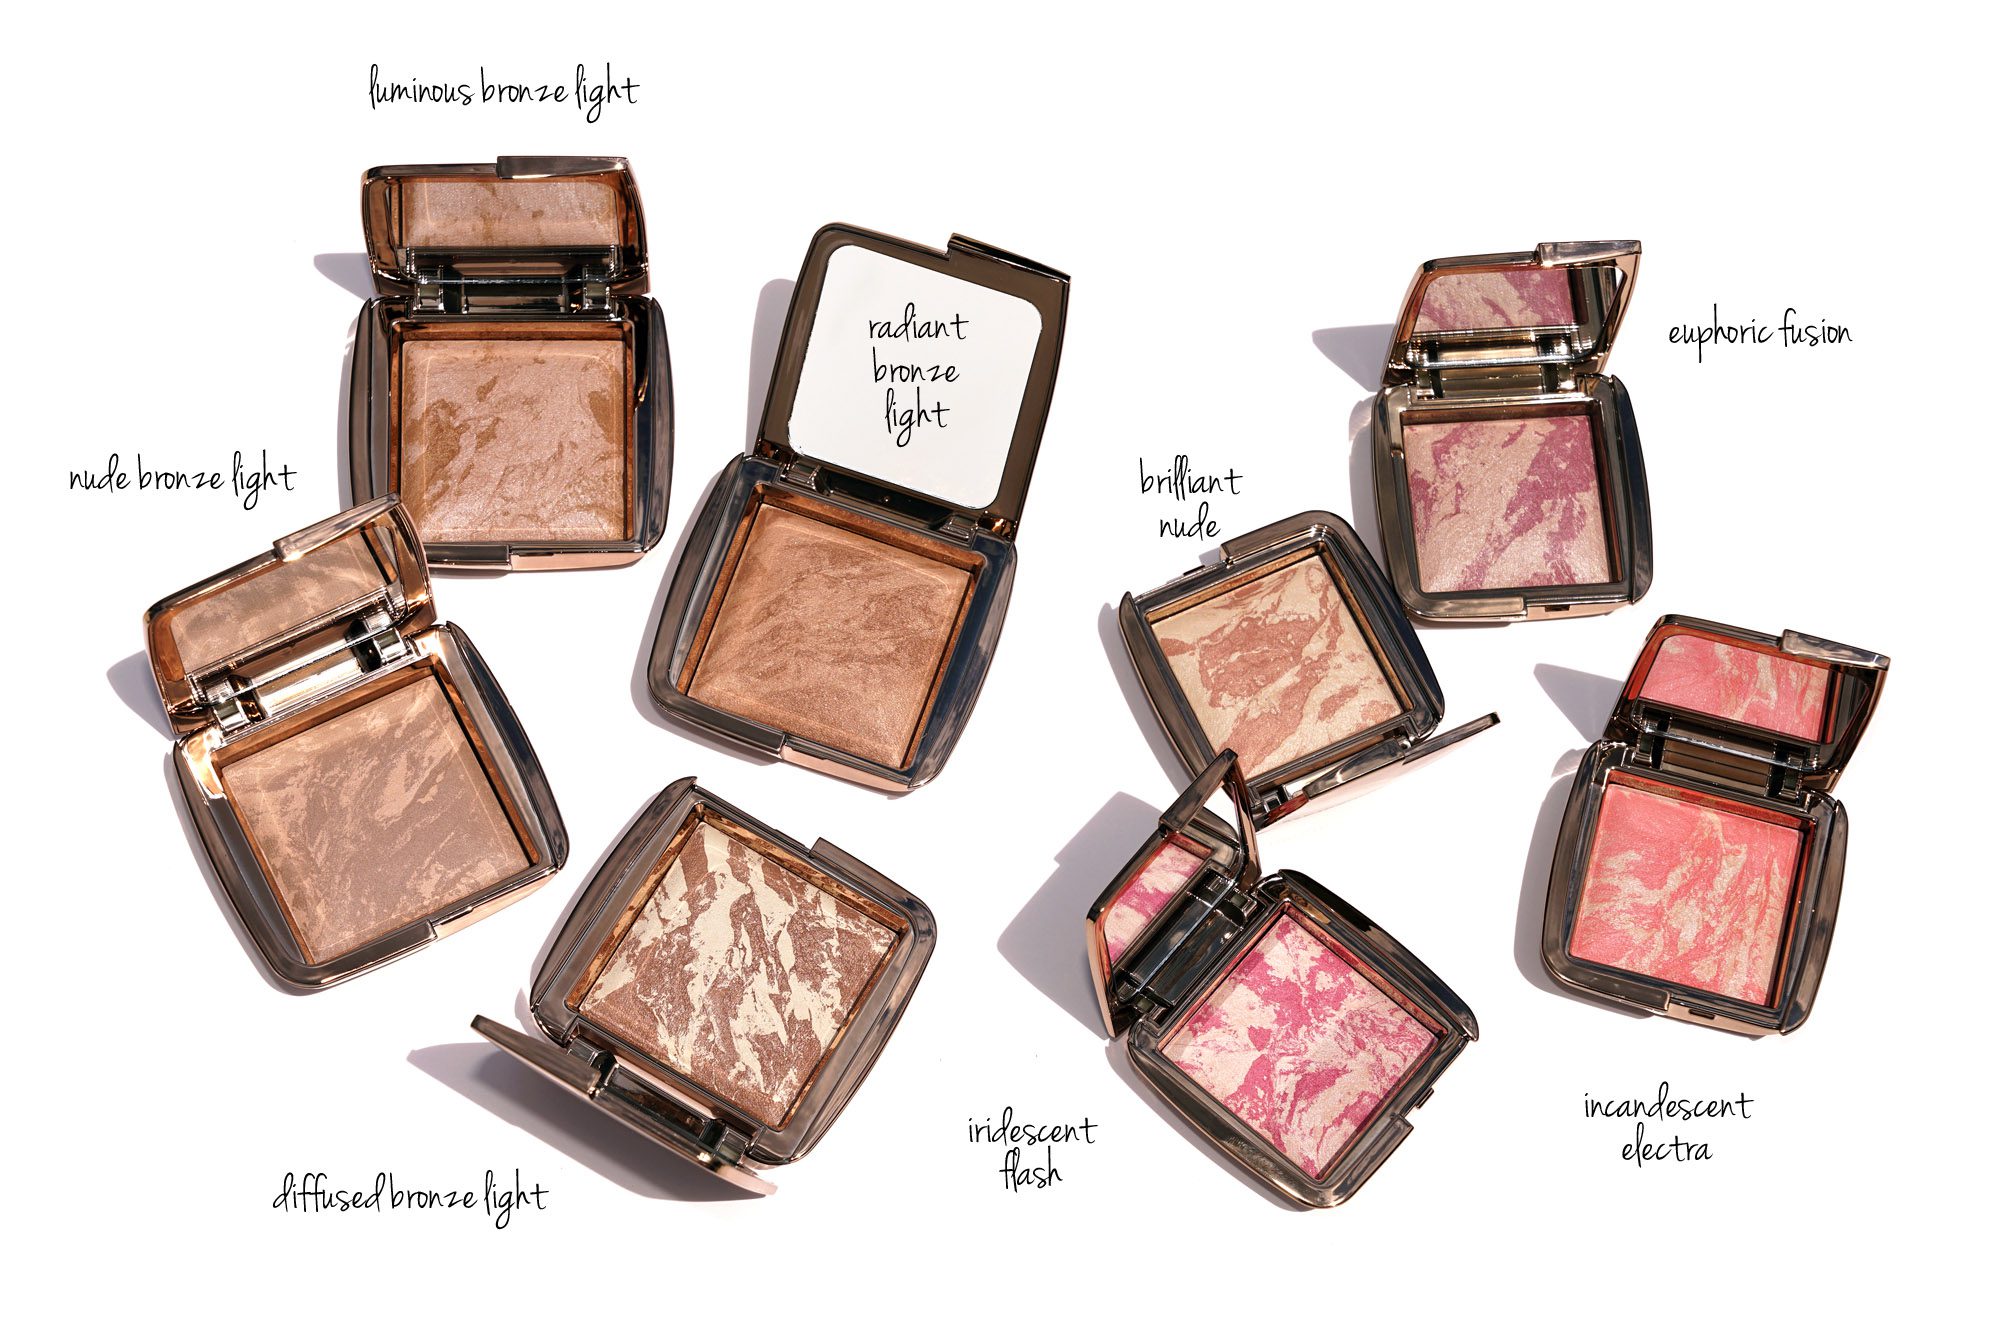 hourglass ambient light review